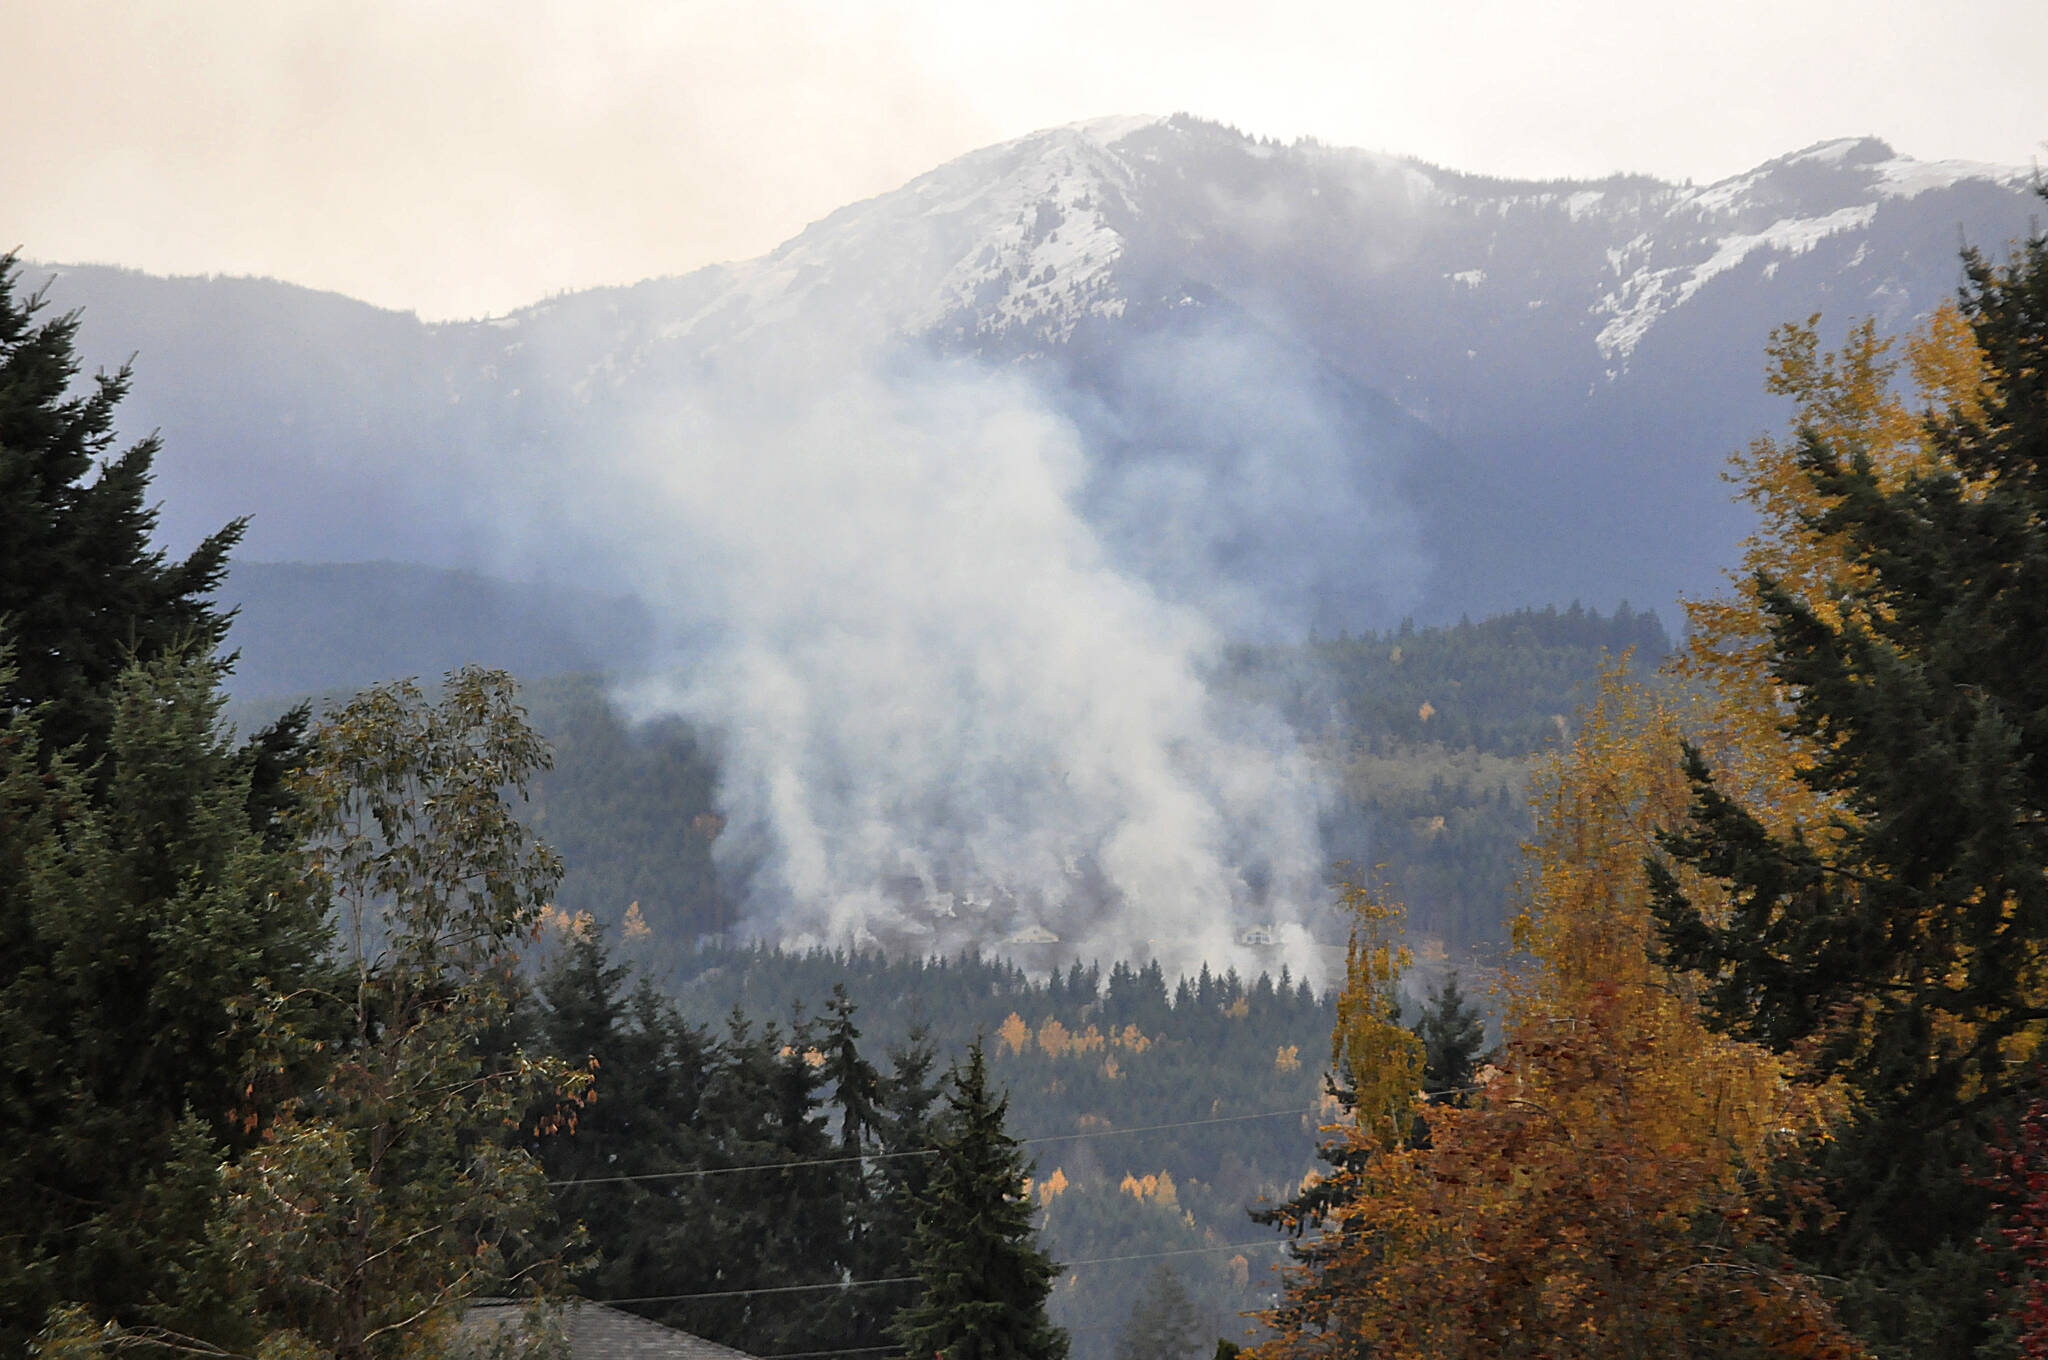 Sequim Gazette photo by Matthew Nash/ A slash pile fire was visible from the City of Sequim and across the Sequim area on Nov. 10. Clallam County Fire District 3 officials said several concerned citizens reported the fire, which was found to be legal and in control.